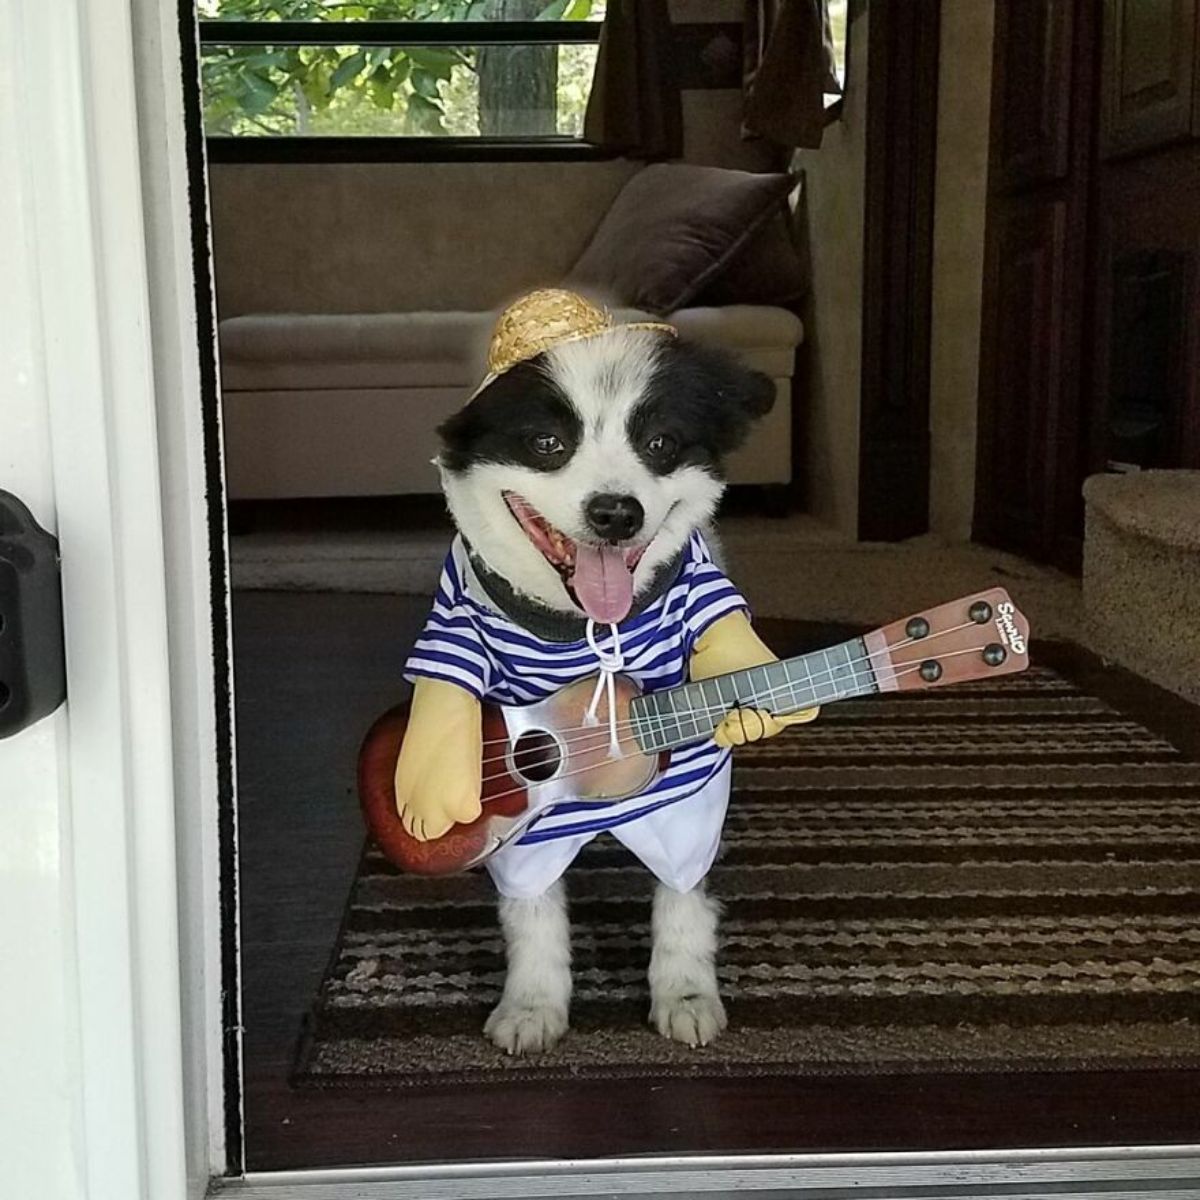 black and white dog who looks like he's smiling wearing an outfit with a straw hat and a guitar